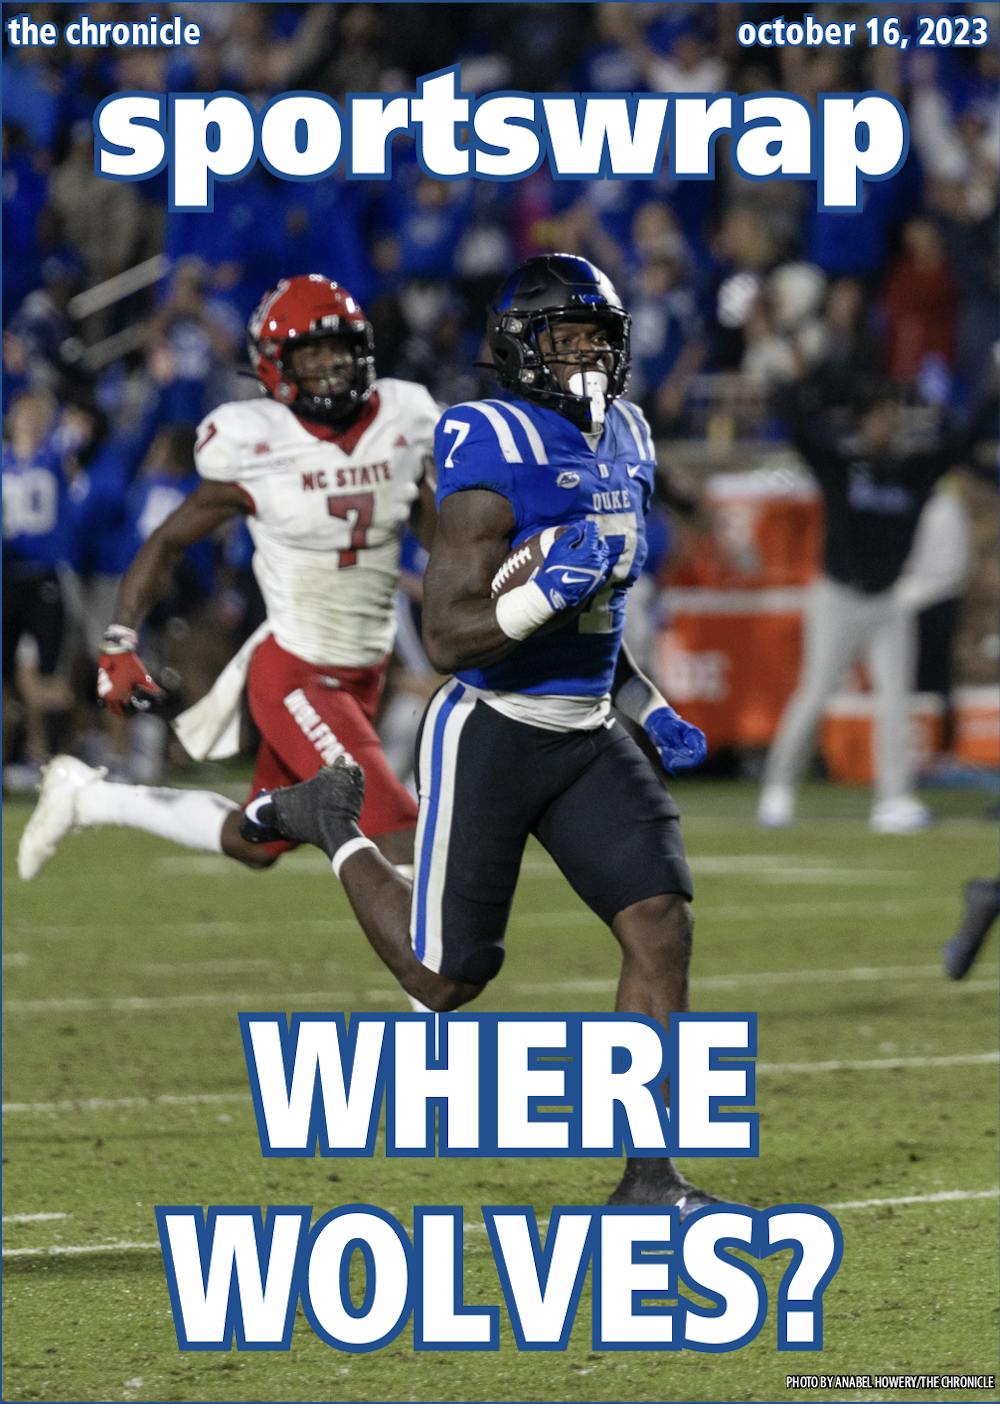 Jordan Waters rushes to the end zone during Duke's win against N.C. State.